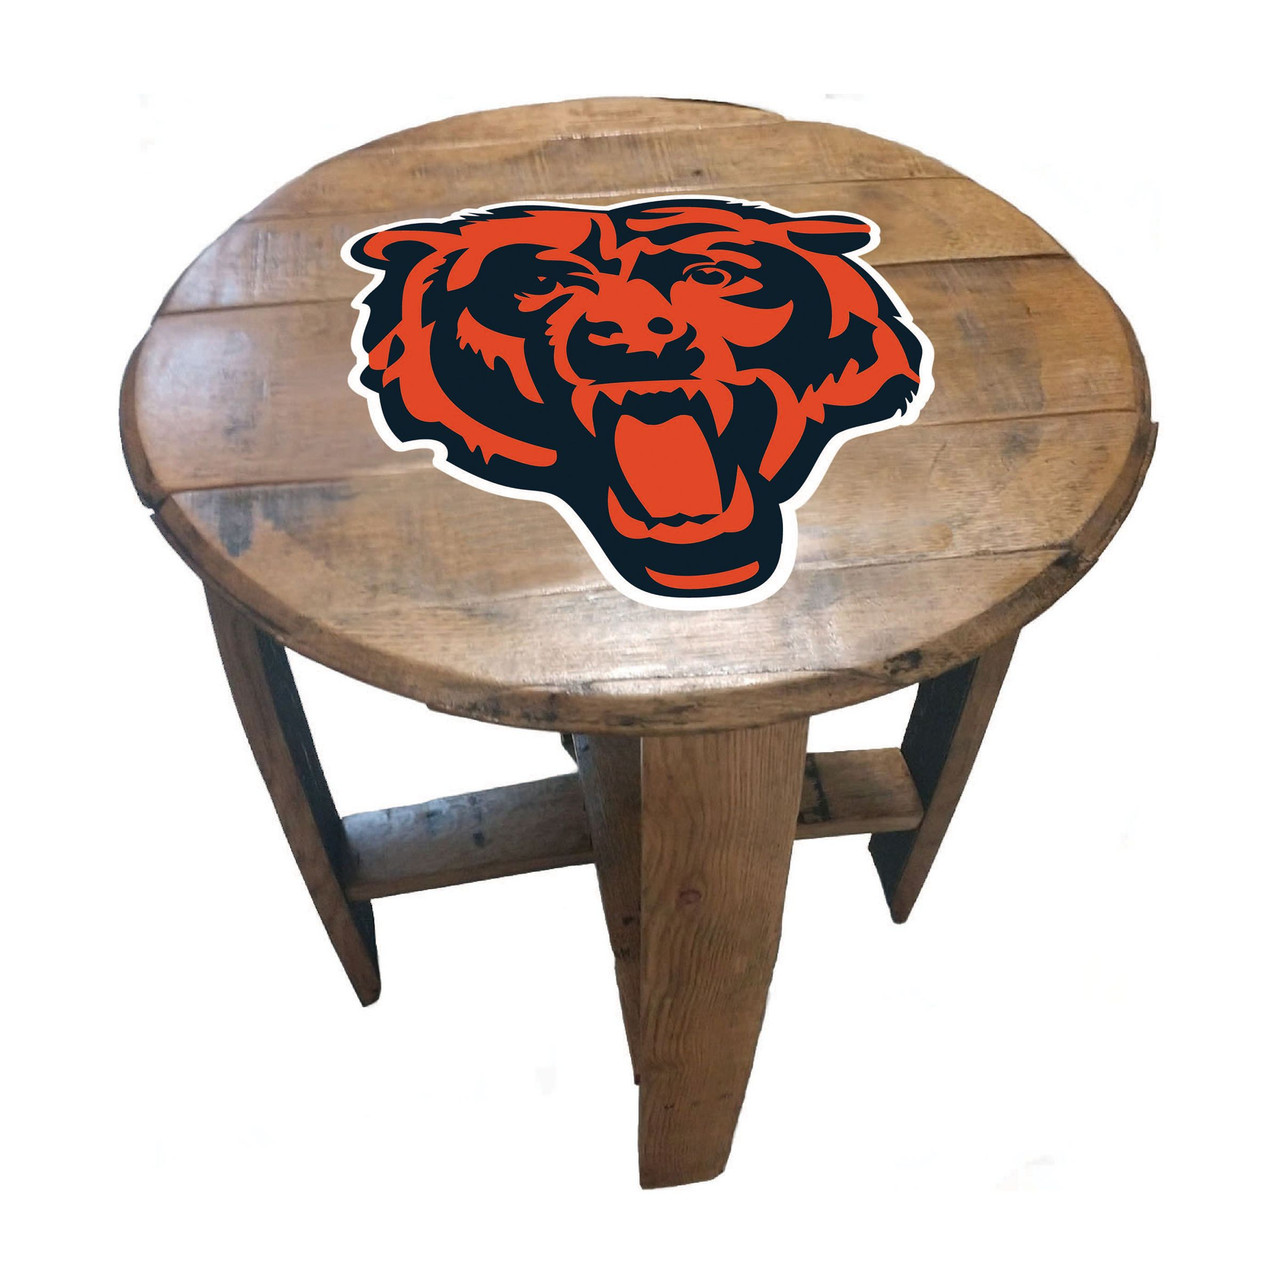 629-1019, Chicago, Bears, Chi, Bourbon, Oak, Barrel, Side, Table, FREE SHIPPING, NFL, Imperial